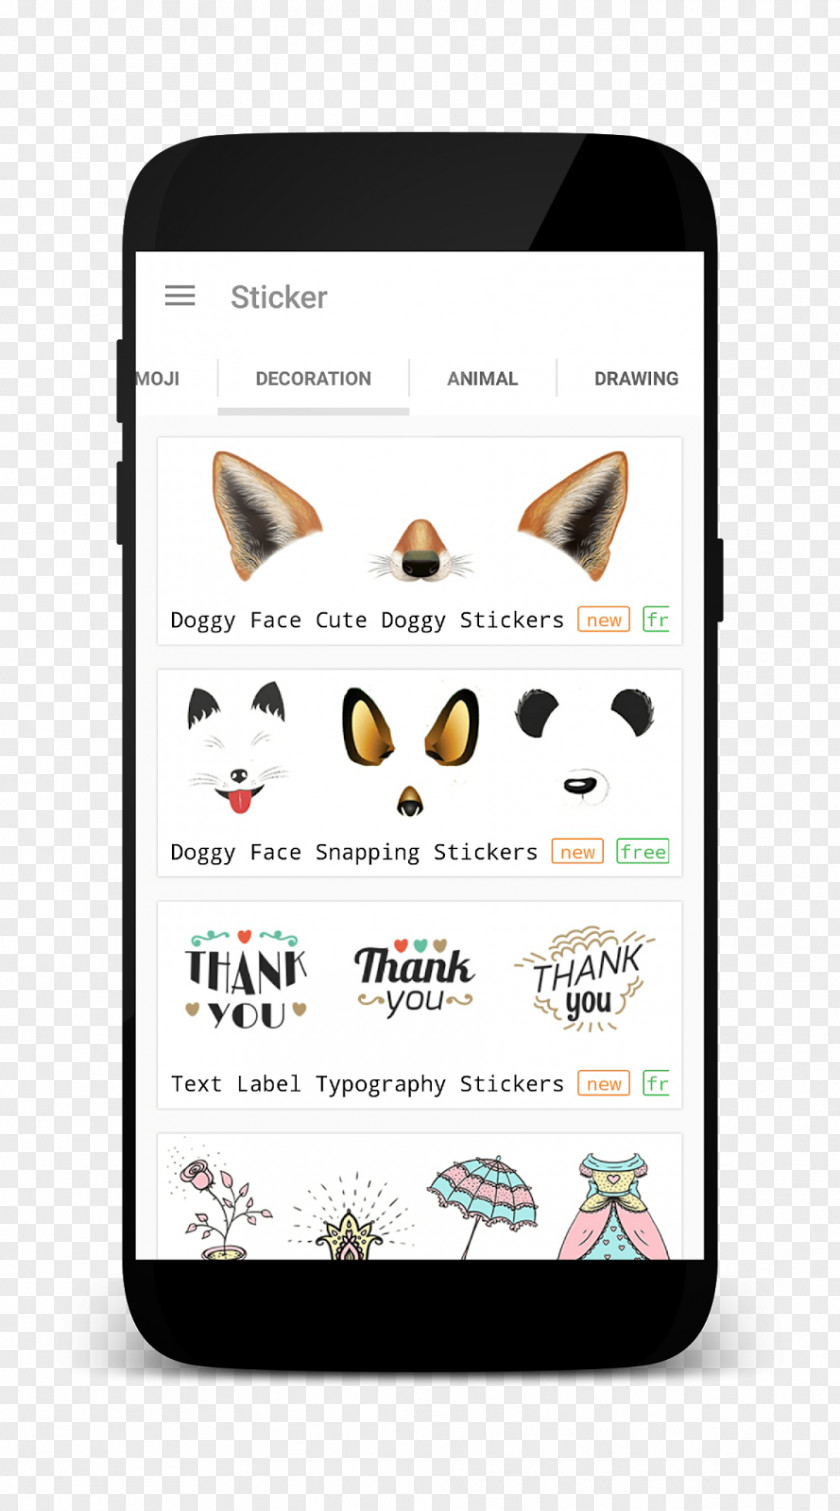 Design Mobile Phone Accessories Brand Font PNG